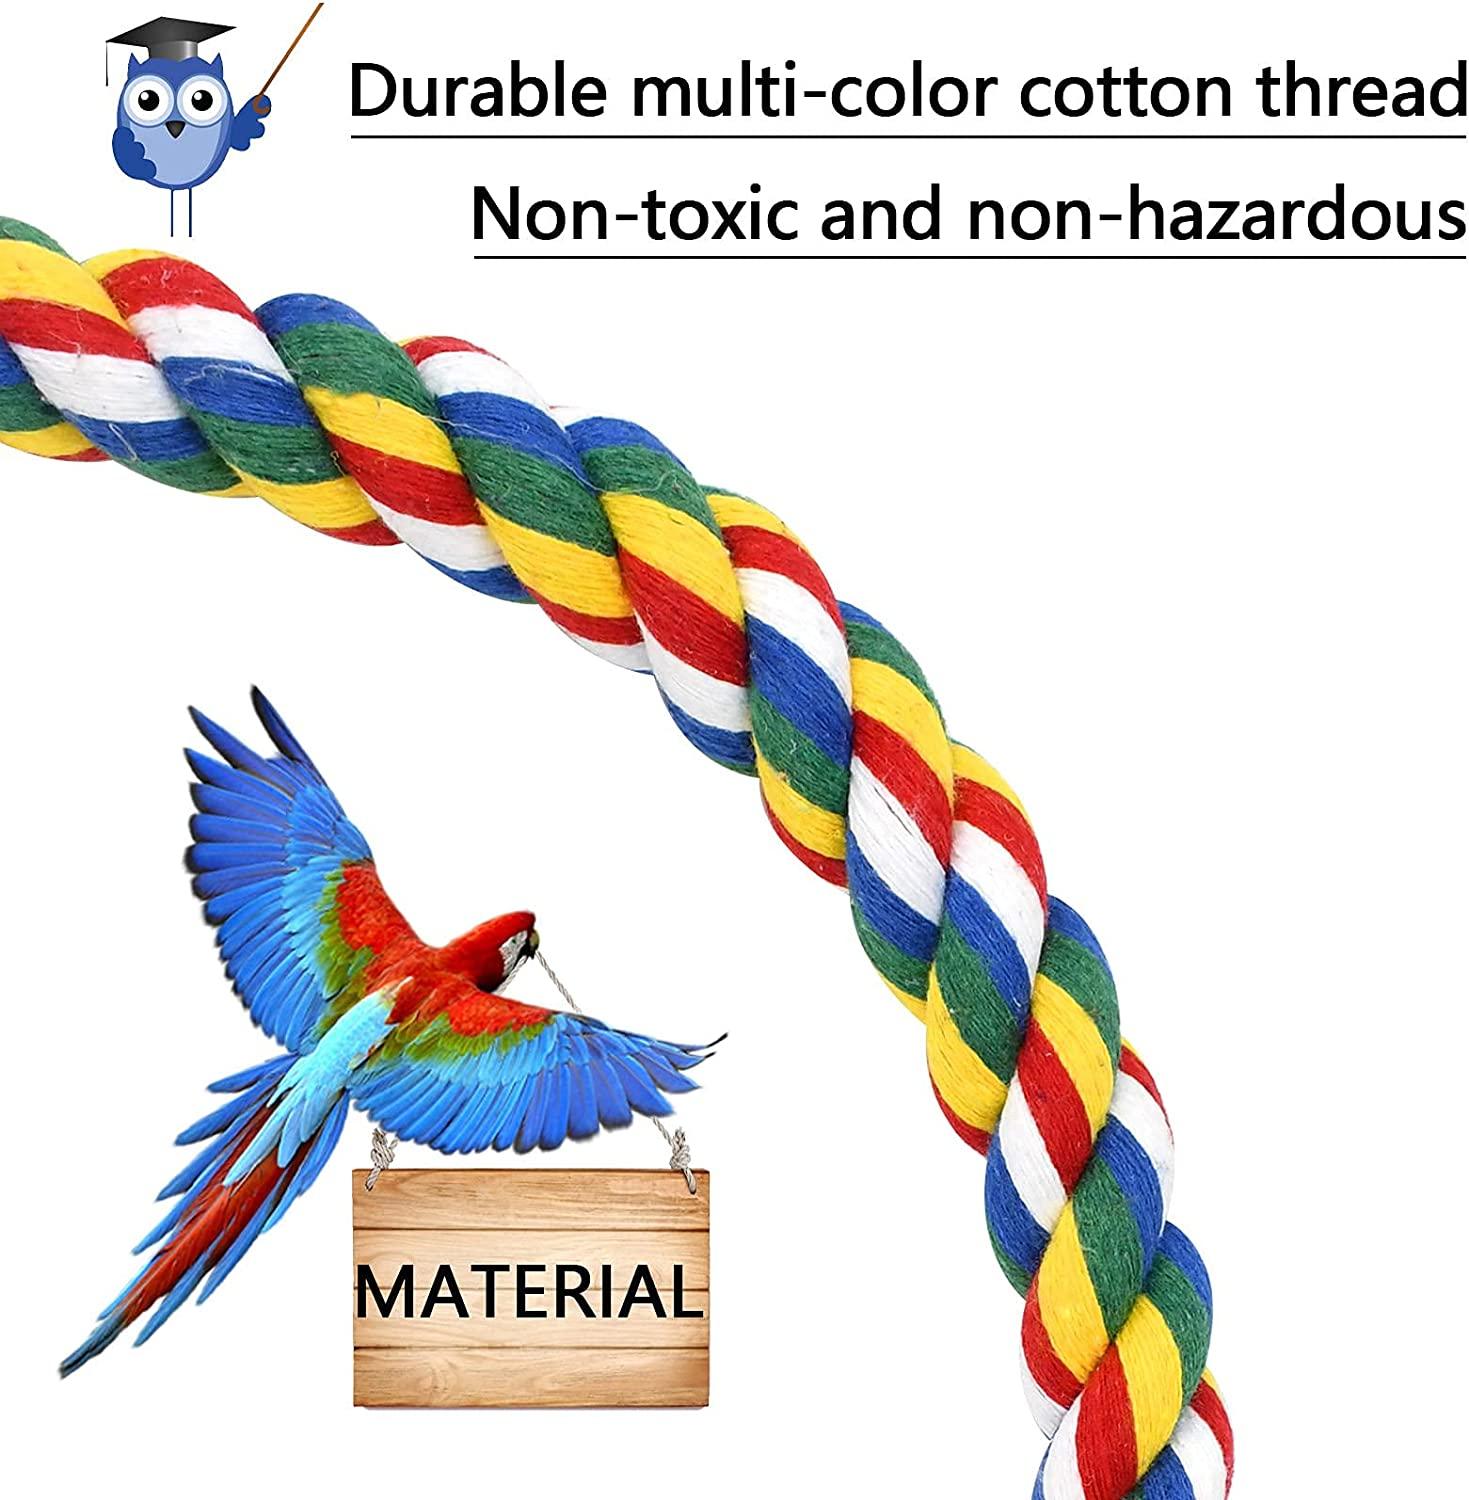 Bird Rope Perch for Parrots, Cockatiels, Parakeets, Budgie Cages Comfy Birds  Colorful Rope Perches Toy 41inch metal nut